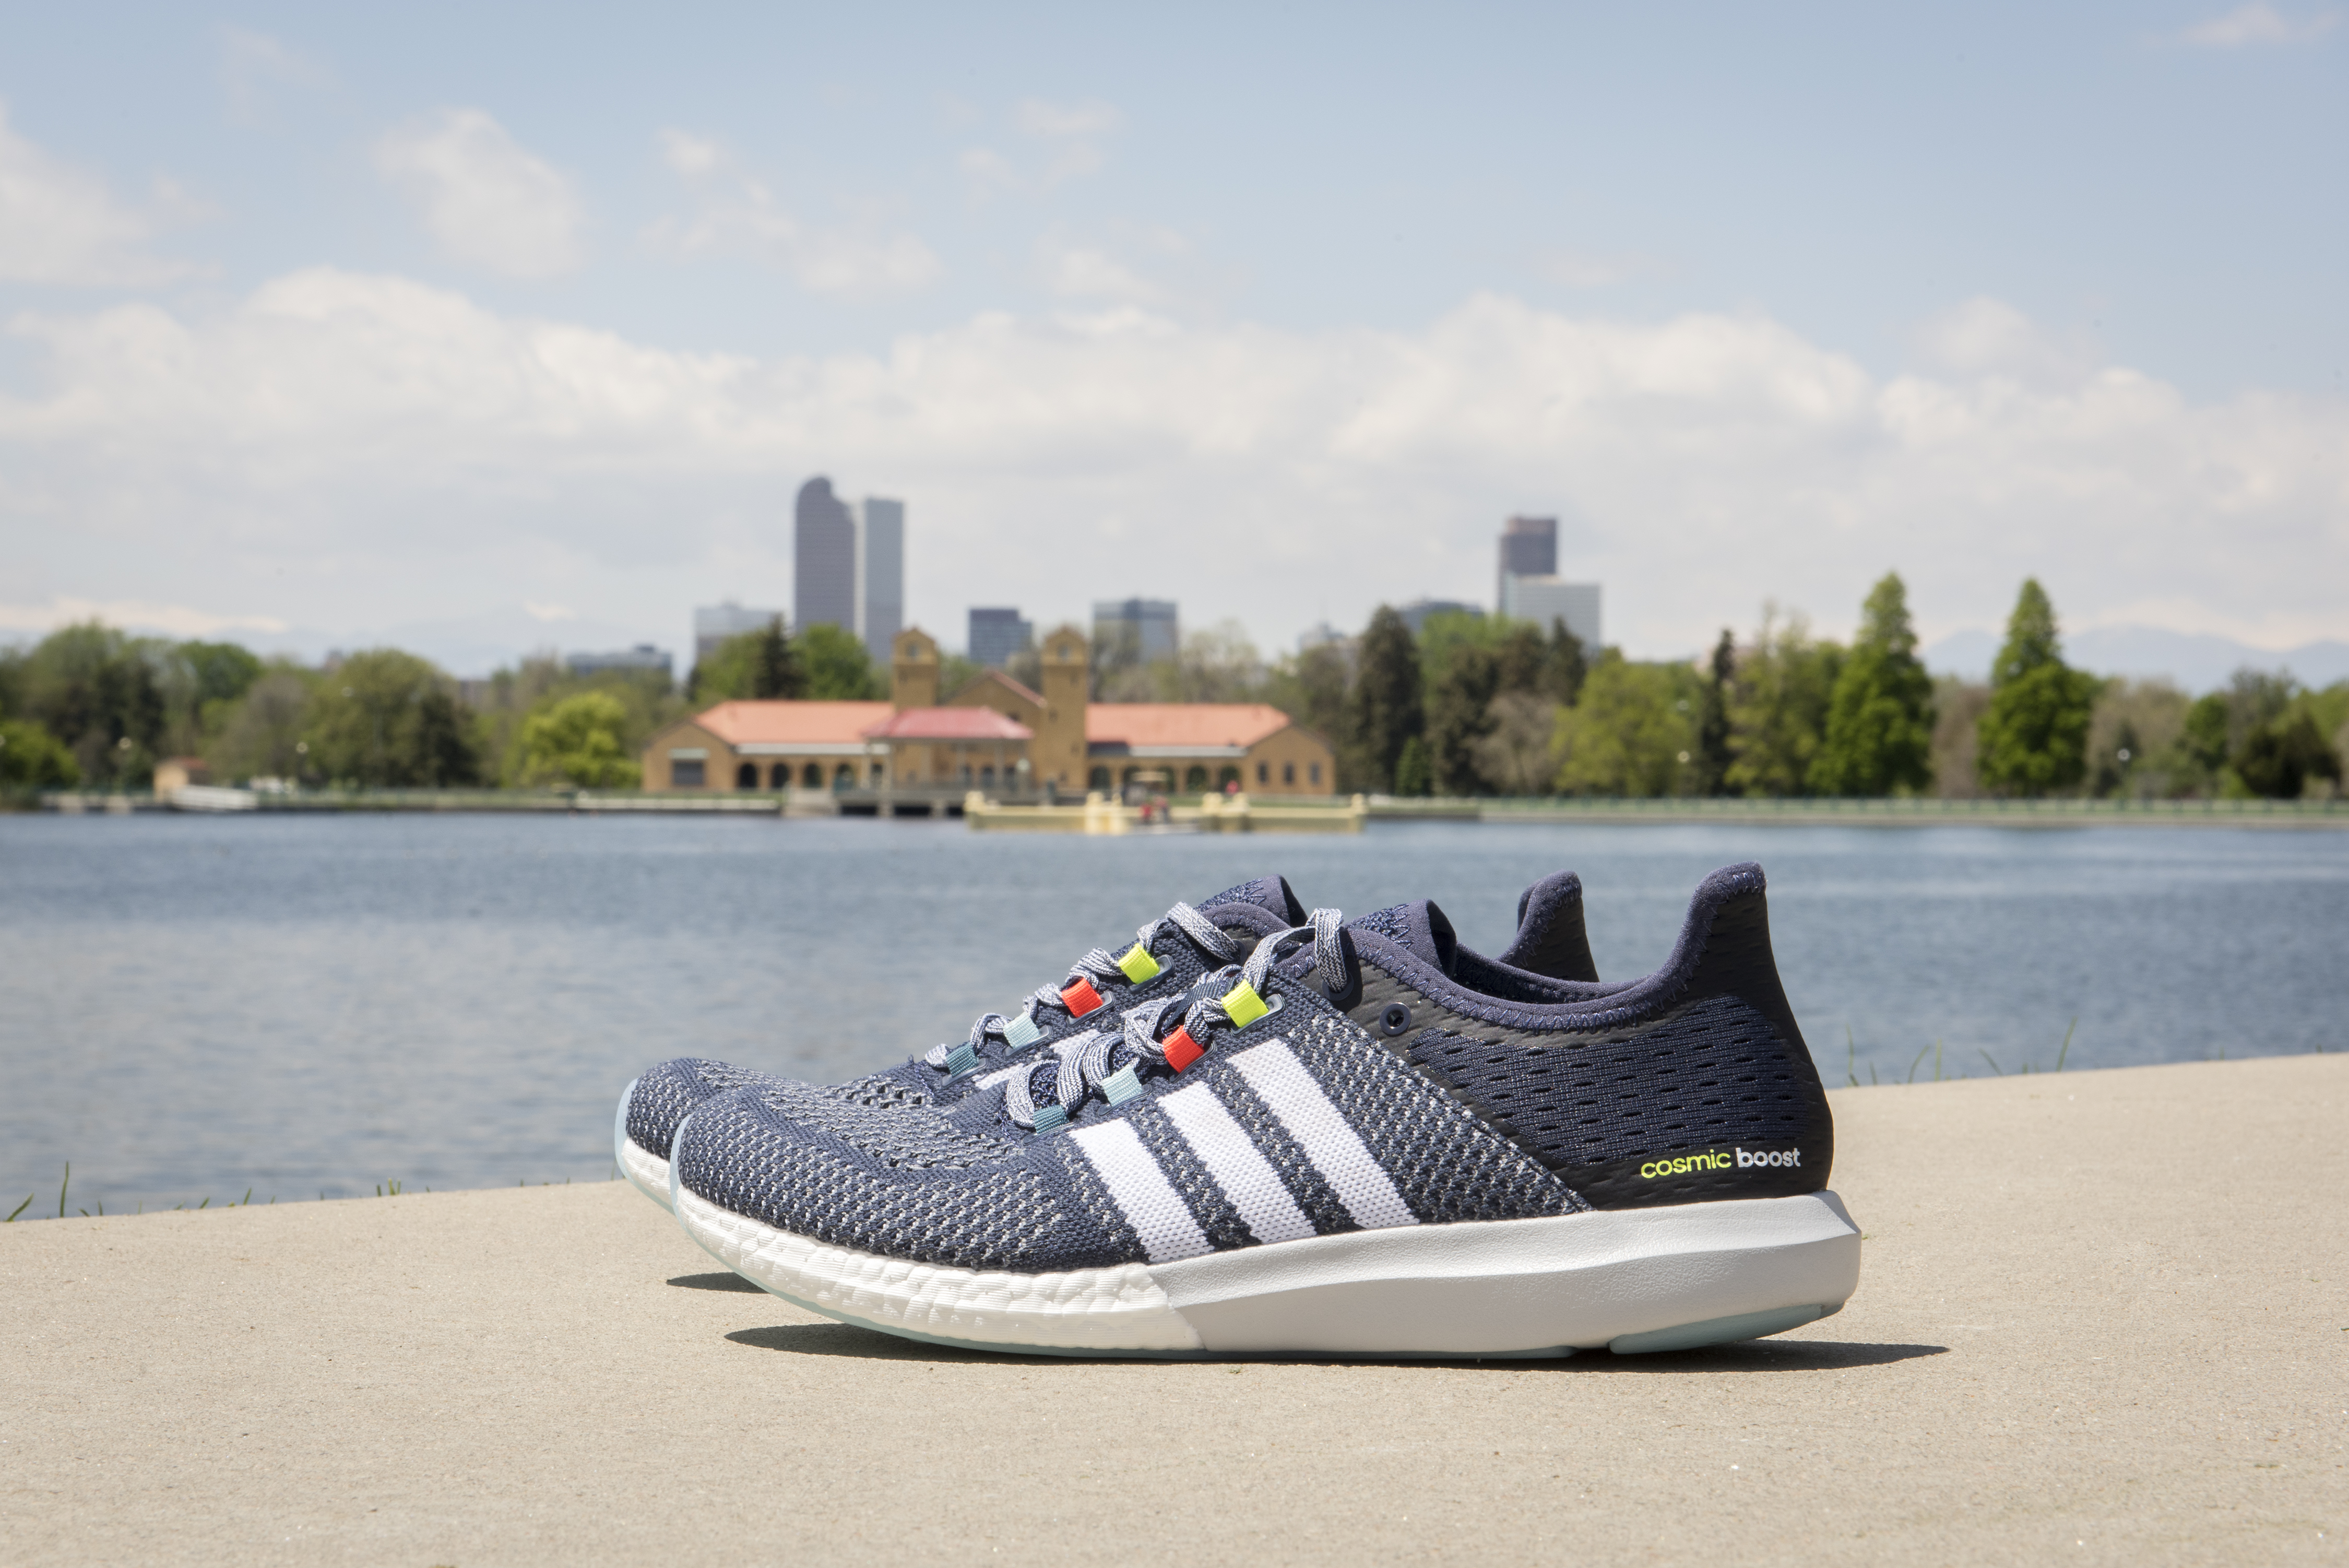 adidas climachill cosmic boost